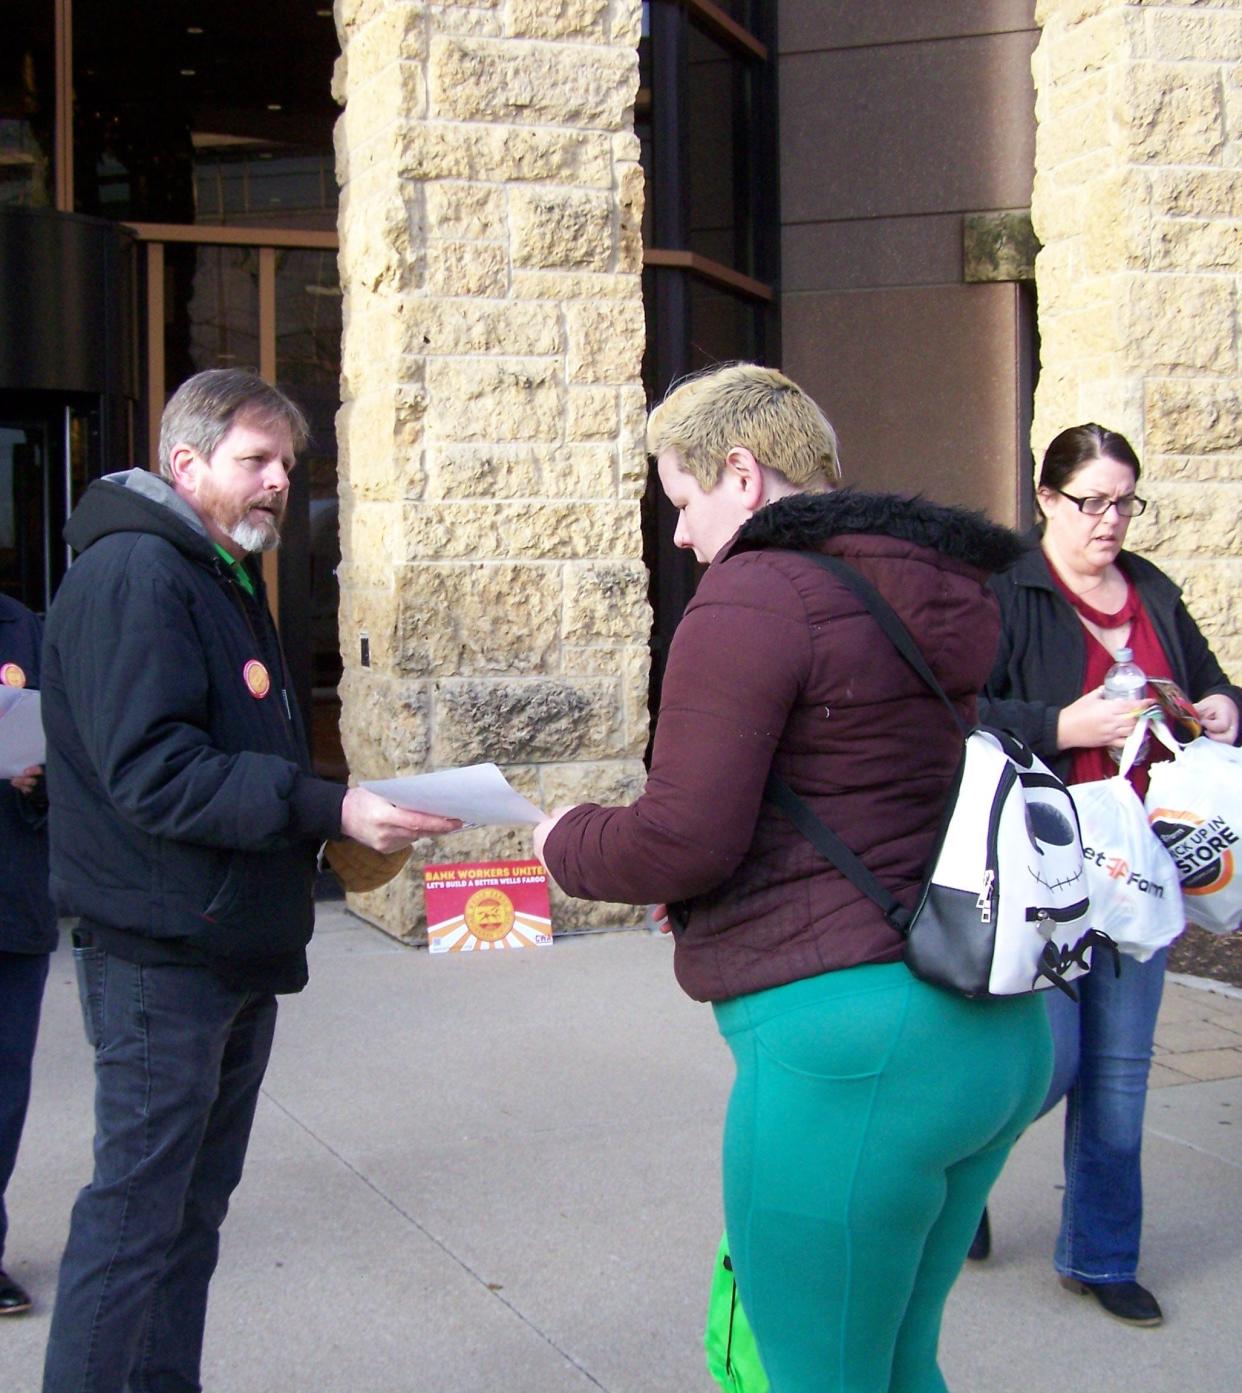 Joe Hertz (left) hands out leaflets promoting a union at Wells Fargo Wednesday morning.